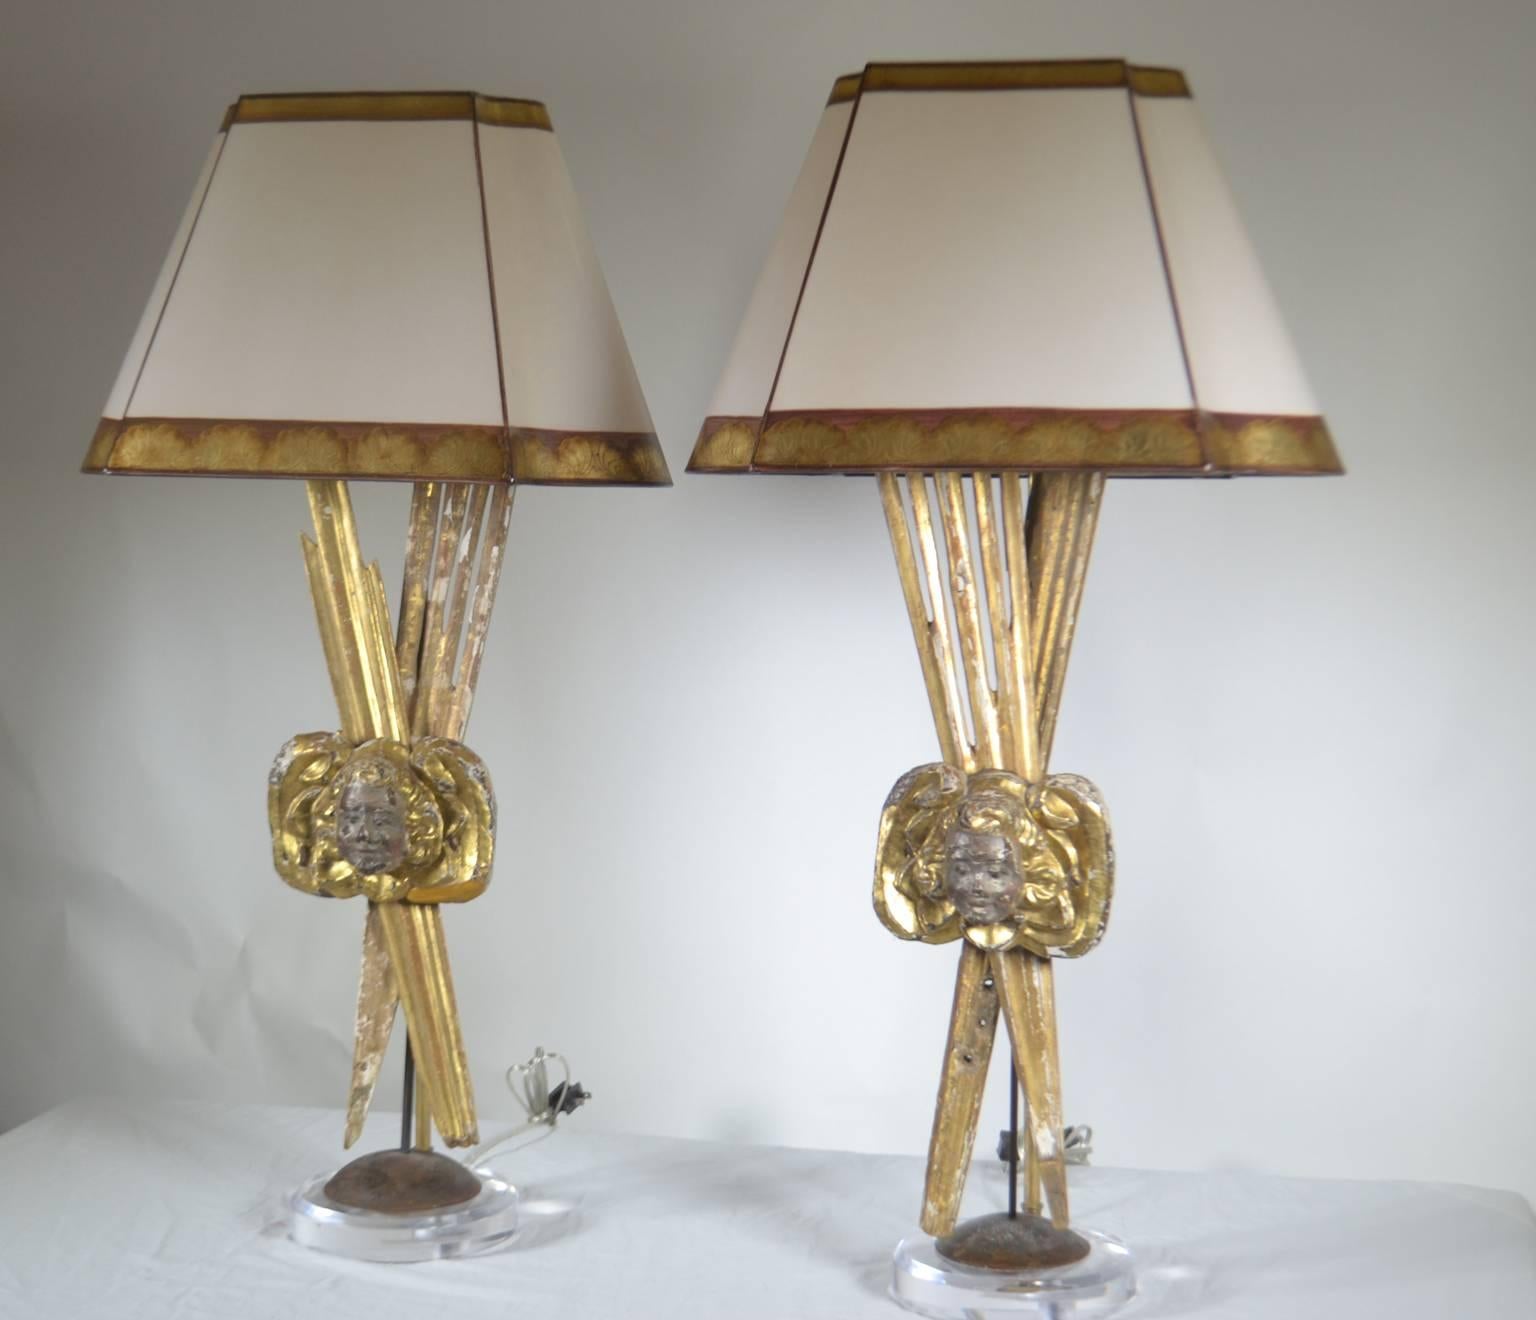 Pair of Italian 18th Century Giltwood Lamps In Good Condition For Sale In Vista, CA